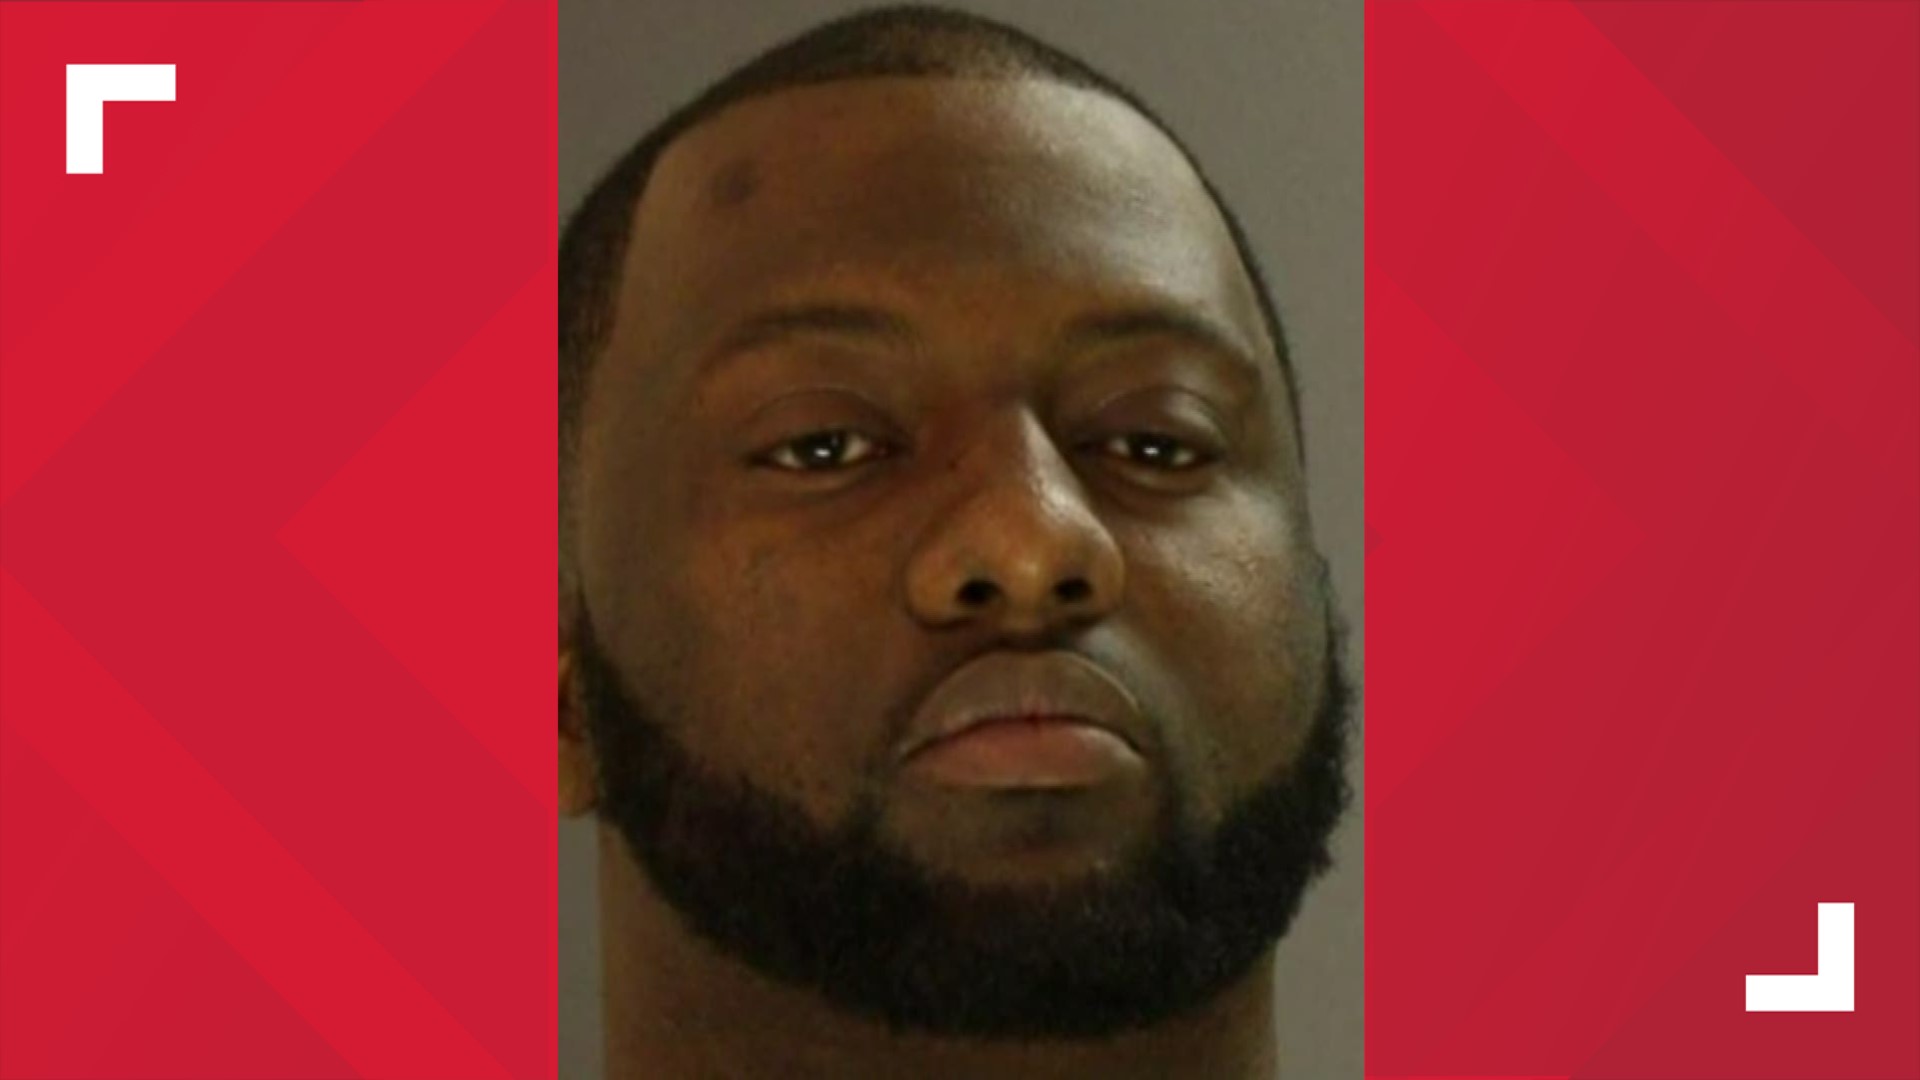 Sedrick Johnson, 27, faces a felony charge of injury to a child in the death of Cedric Jackson Jr., who was reported missing Wednesday morning.